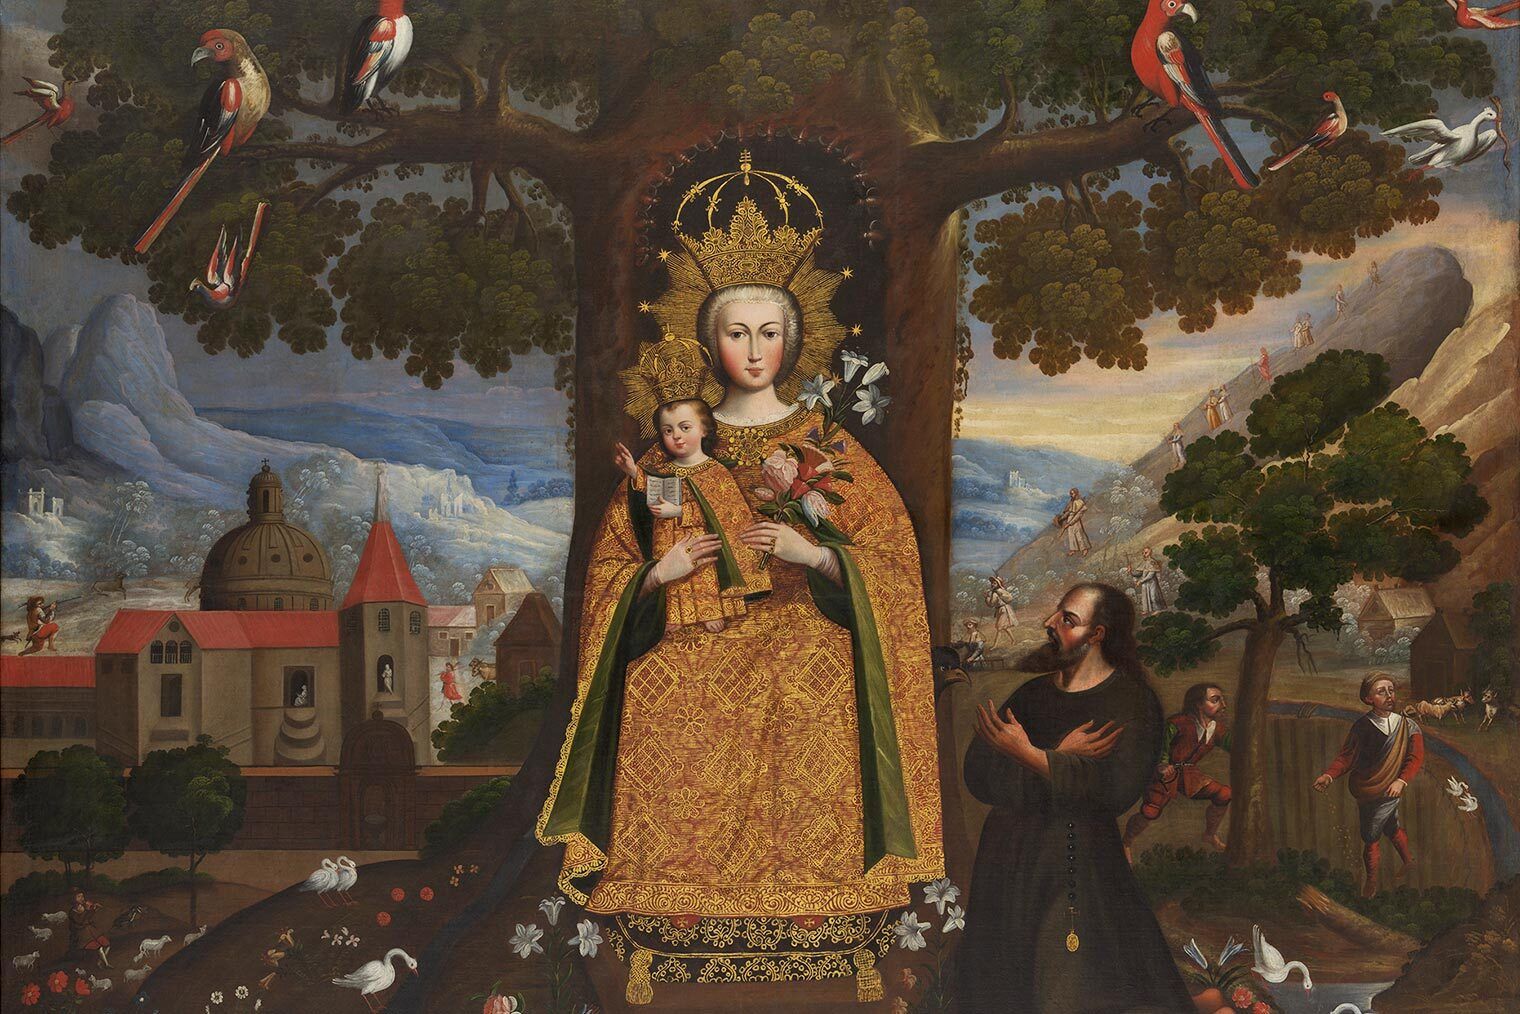 An ornate painting of the Virgin Mary